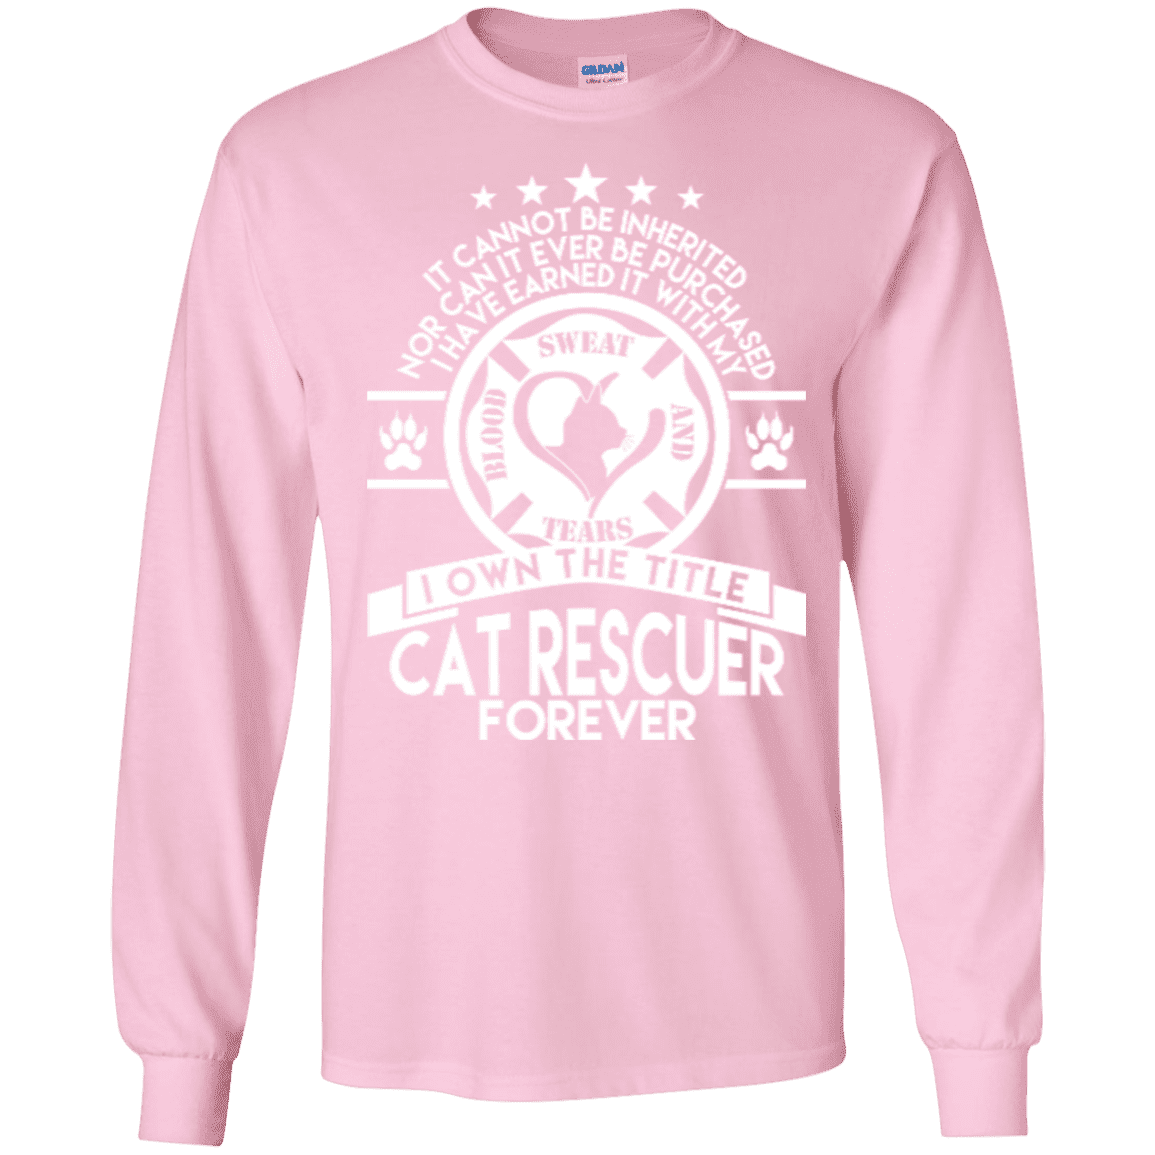 Cat Rescuer Forever - Long Sleeve T Shirt.